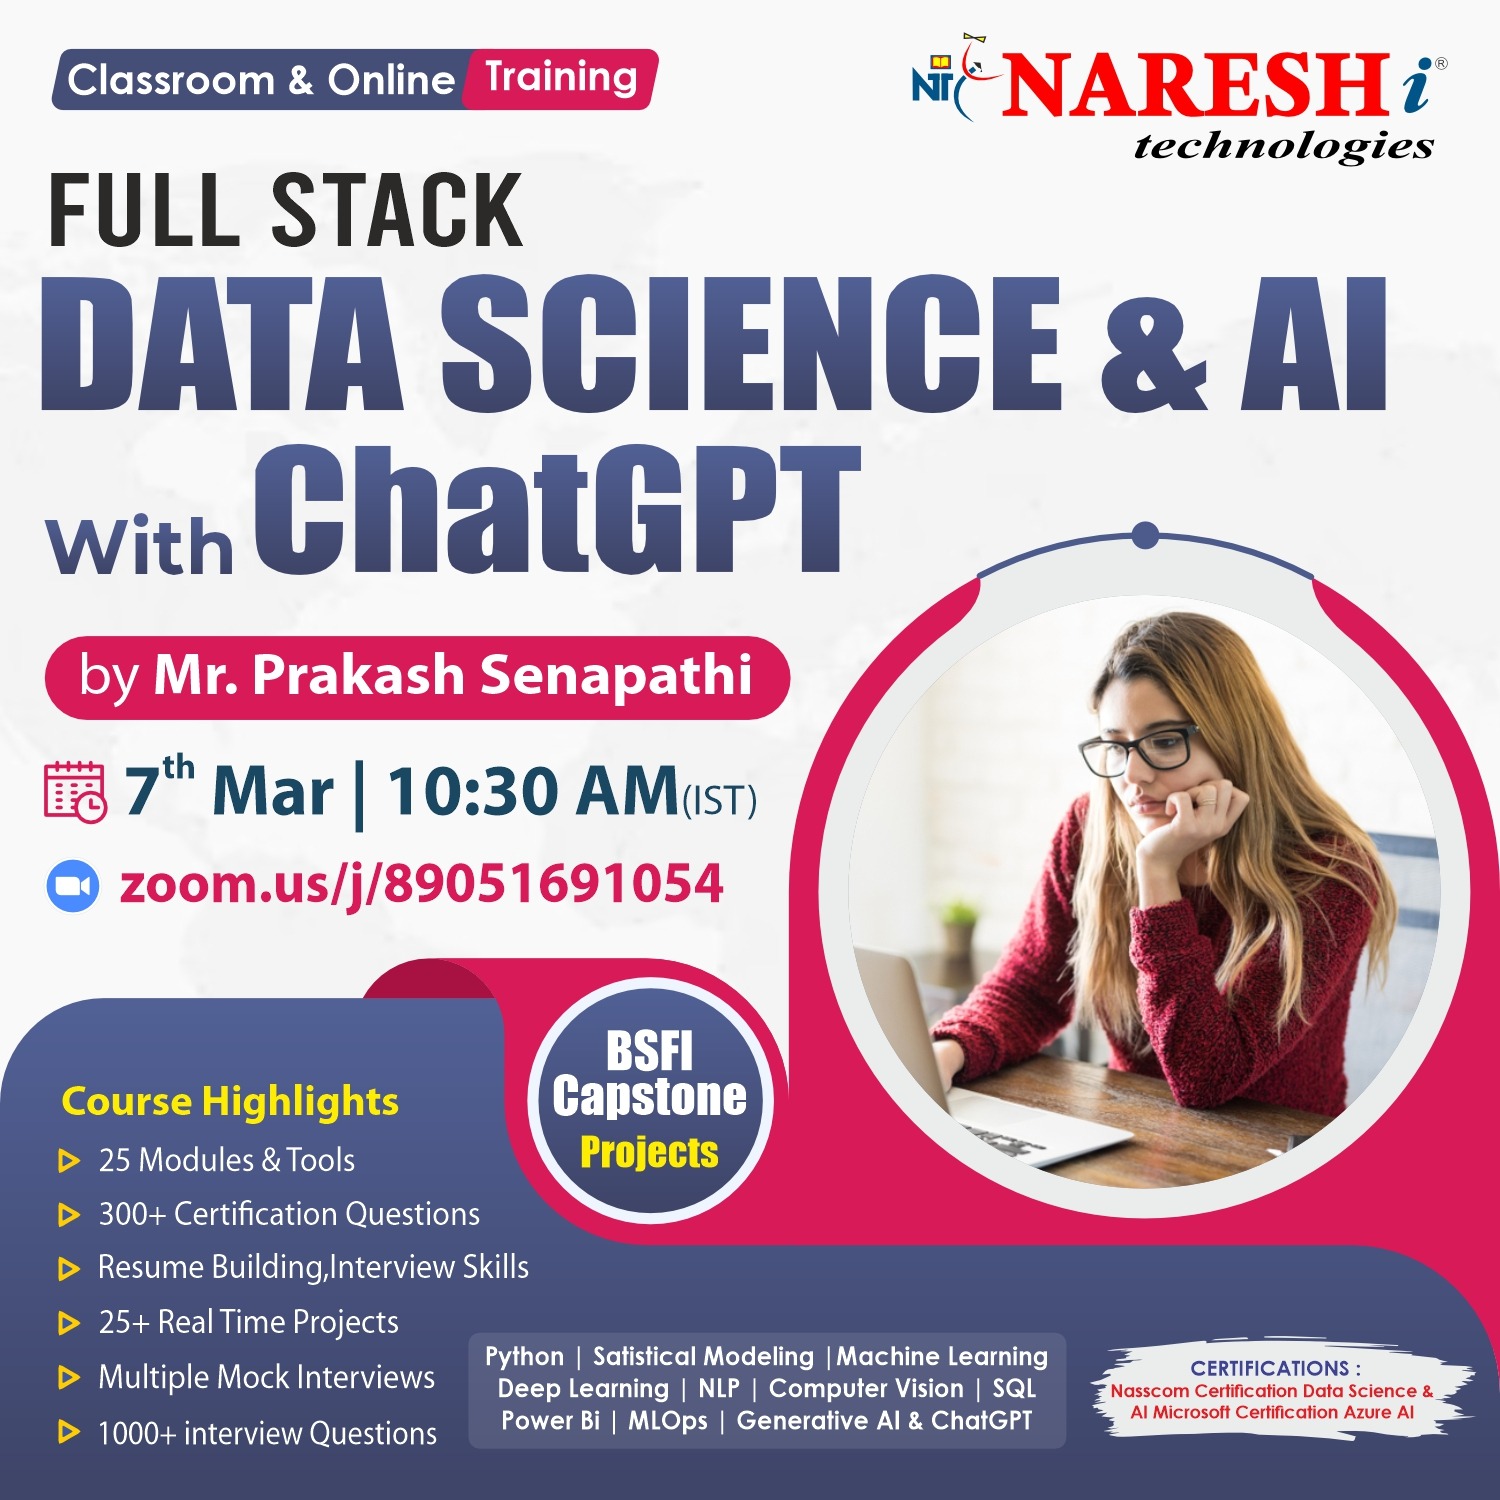 Full Stack Data Science & AI Online Training in Hyderabad -NareshITEducation and LearningCoaching ClassesAll Indiaother